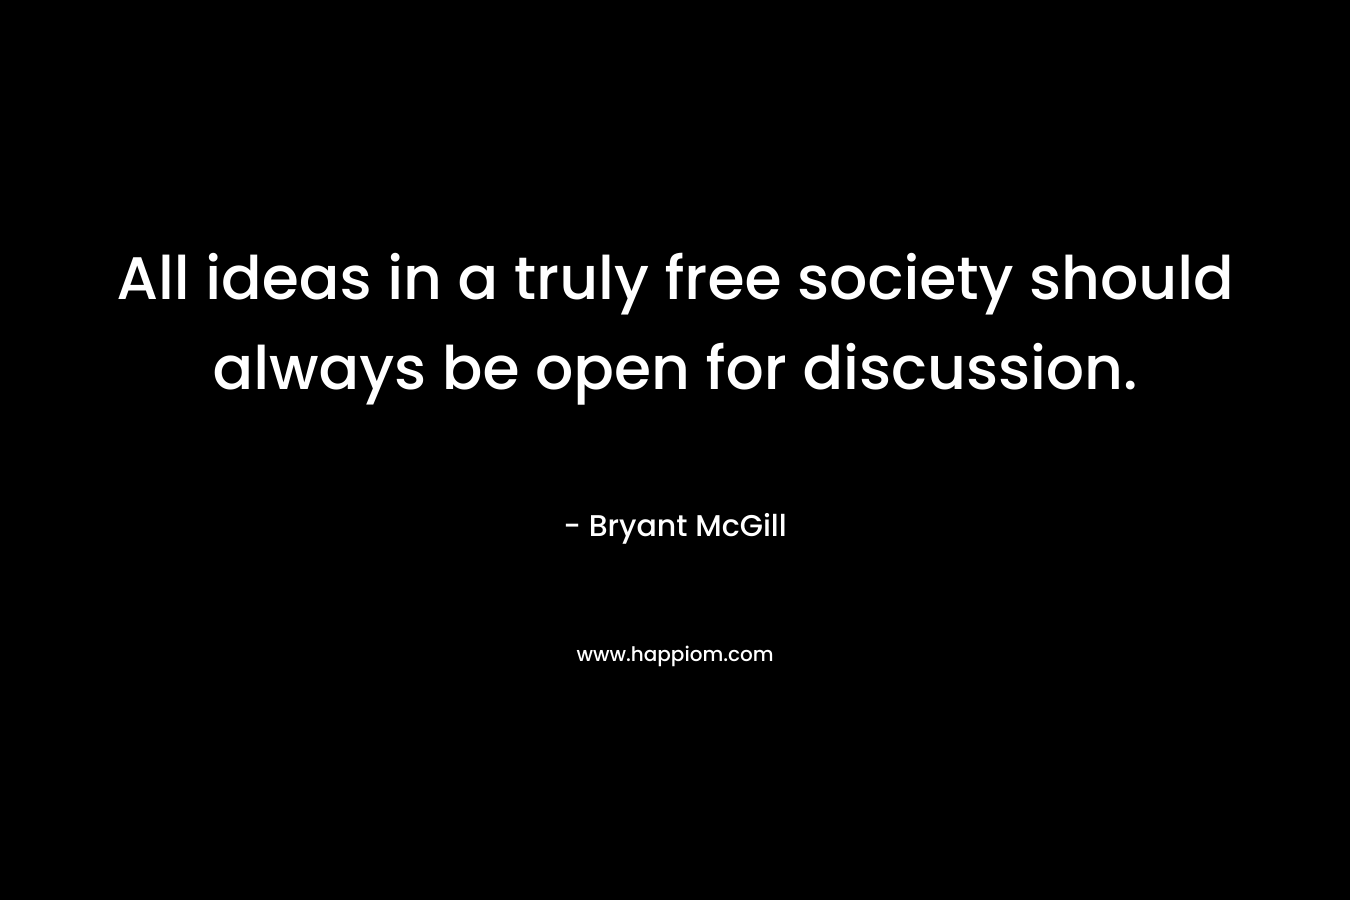 All ideas in a truly free society should always be open for discussion.